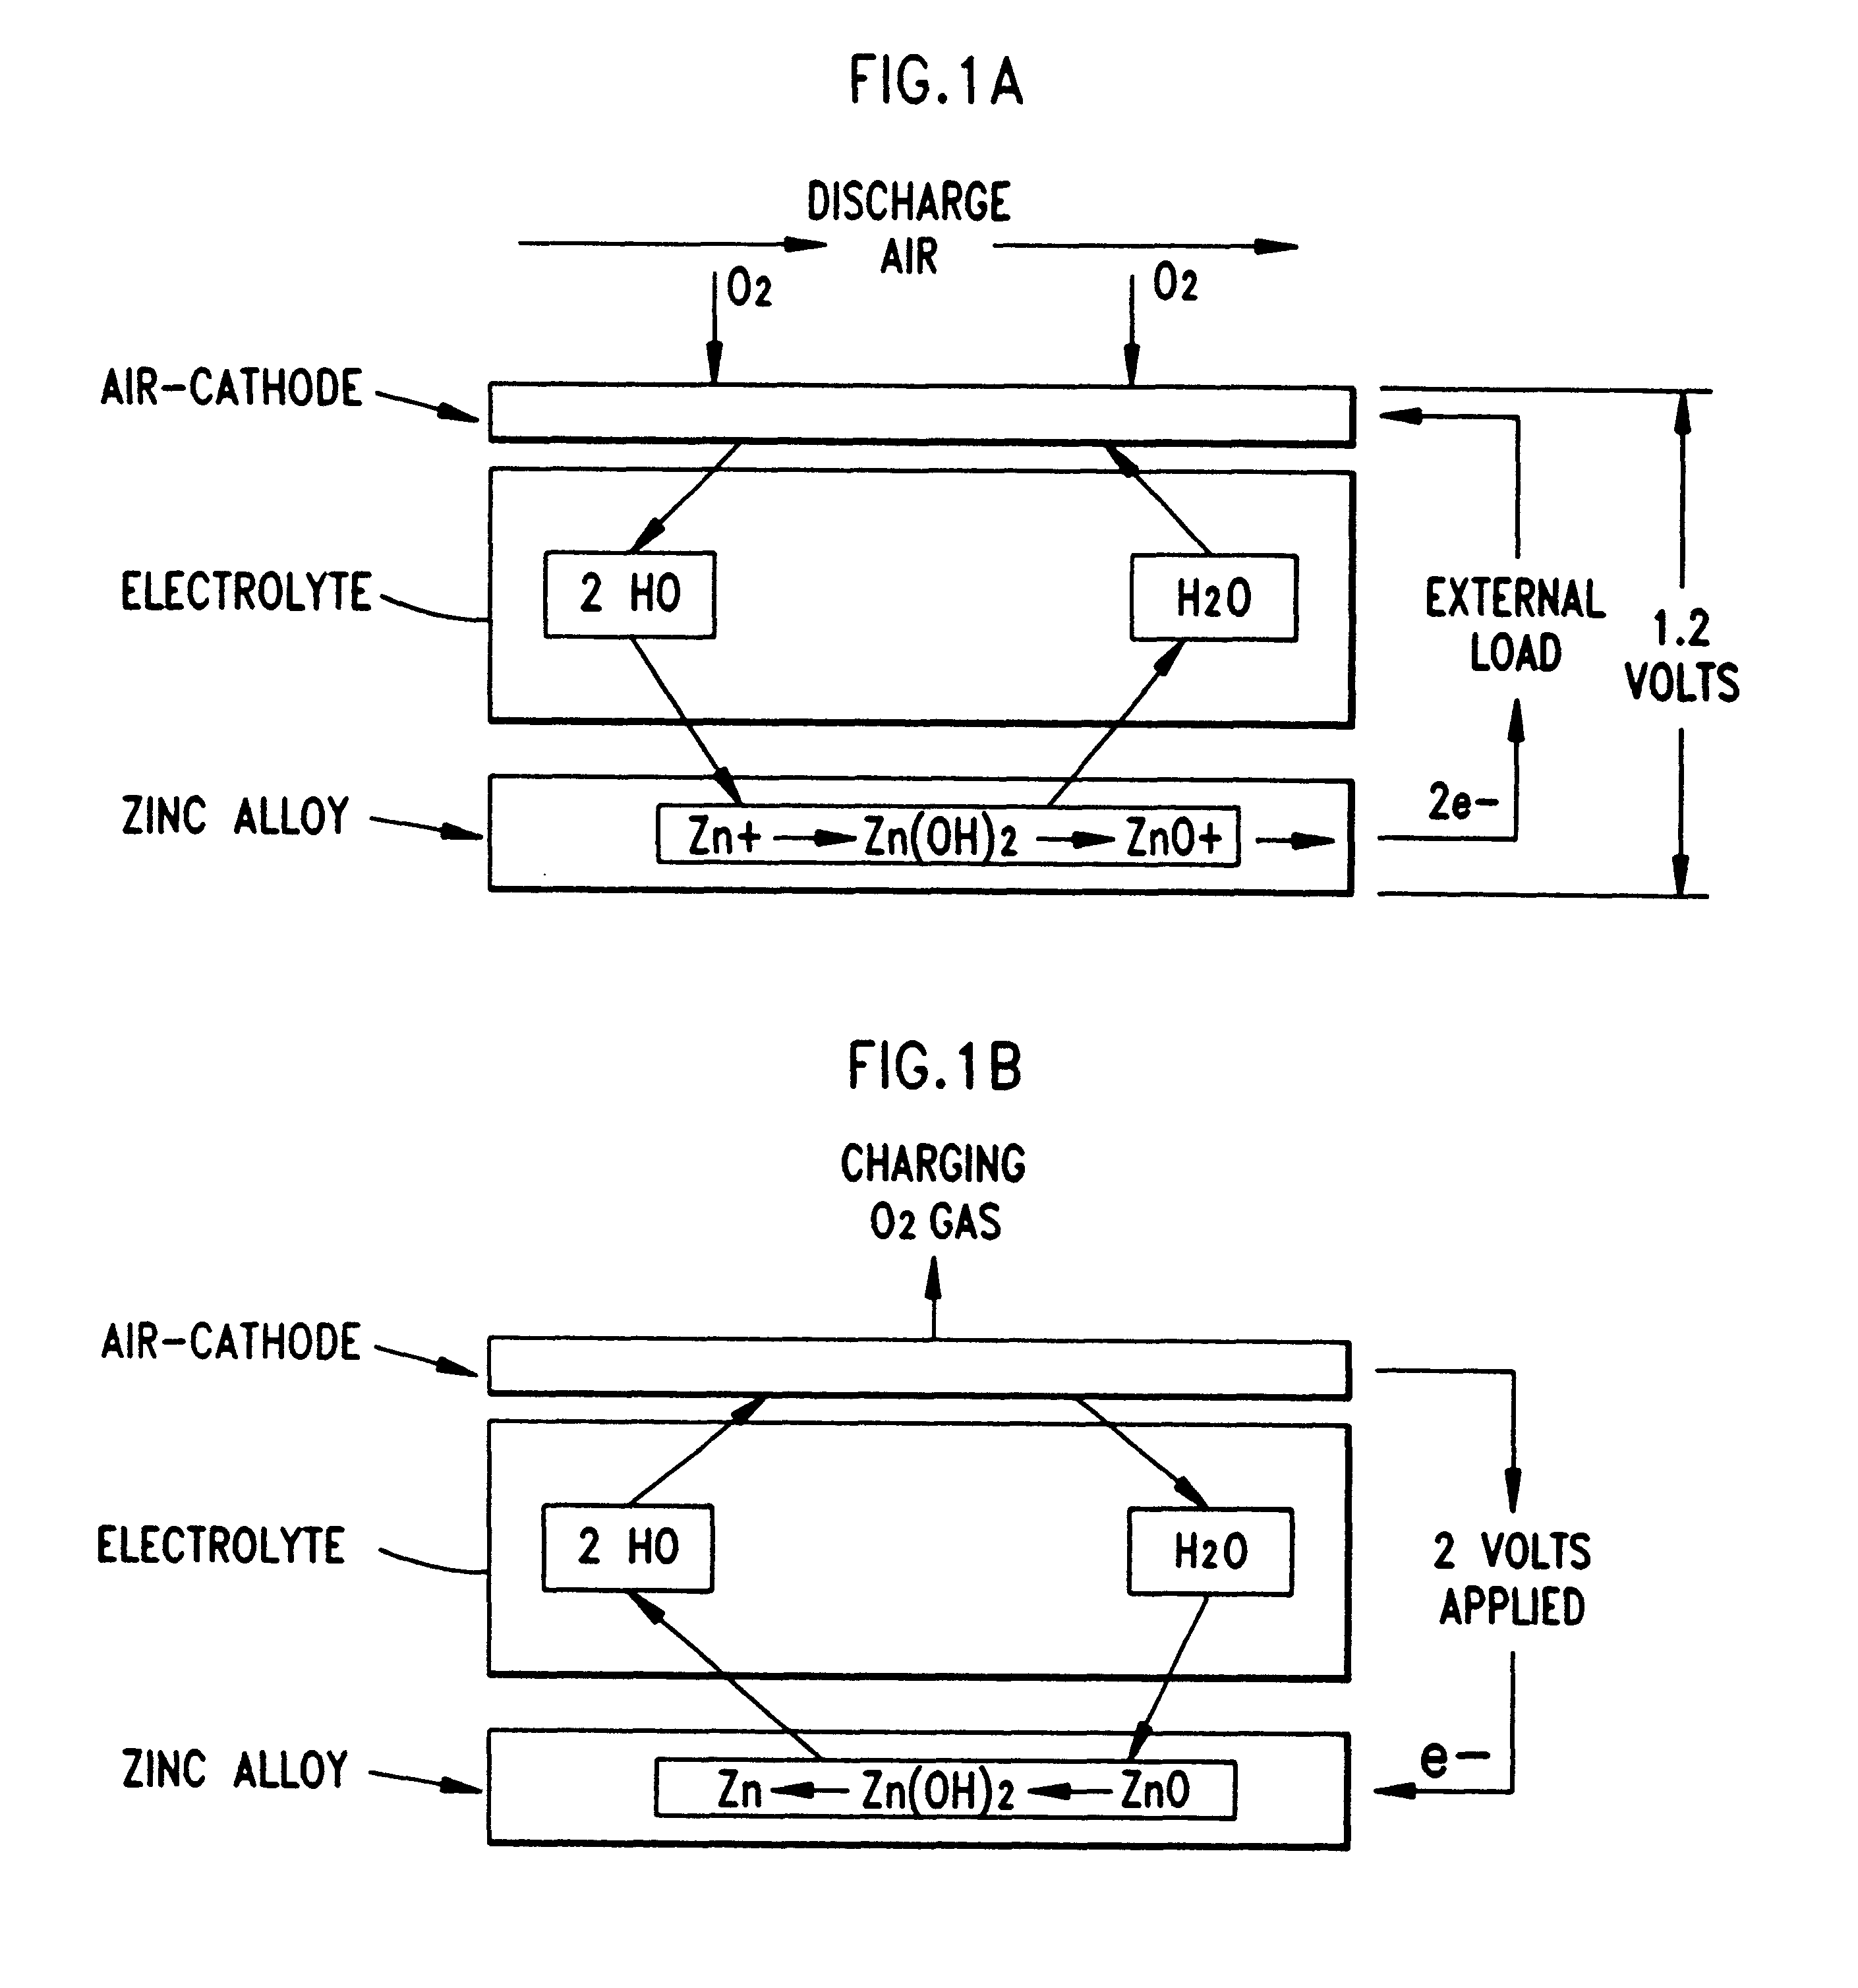 System and method for producing electrical power using metal-air fuel cell battery technology